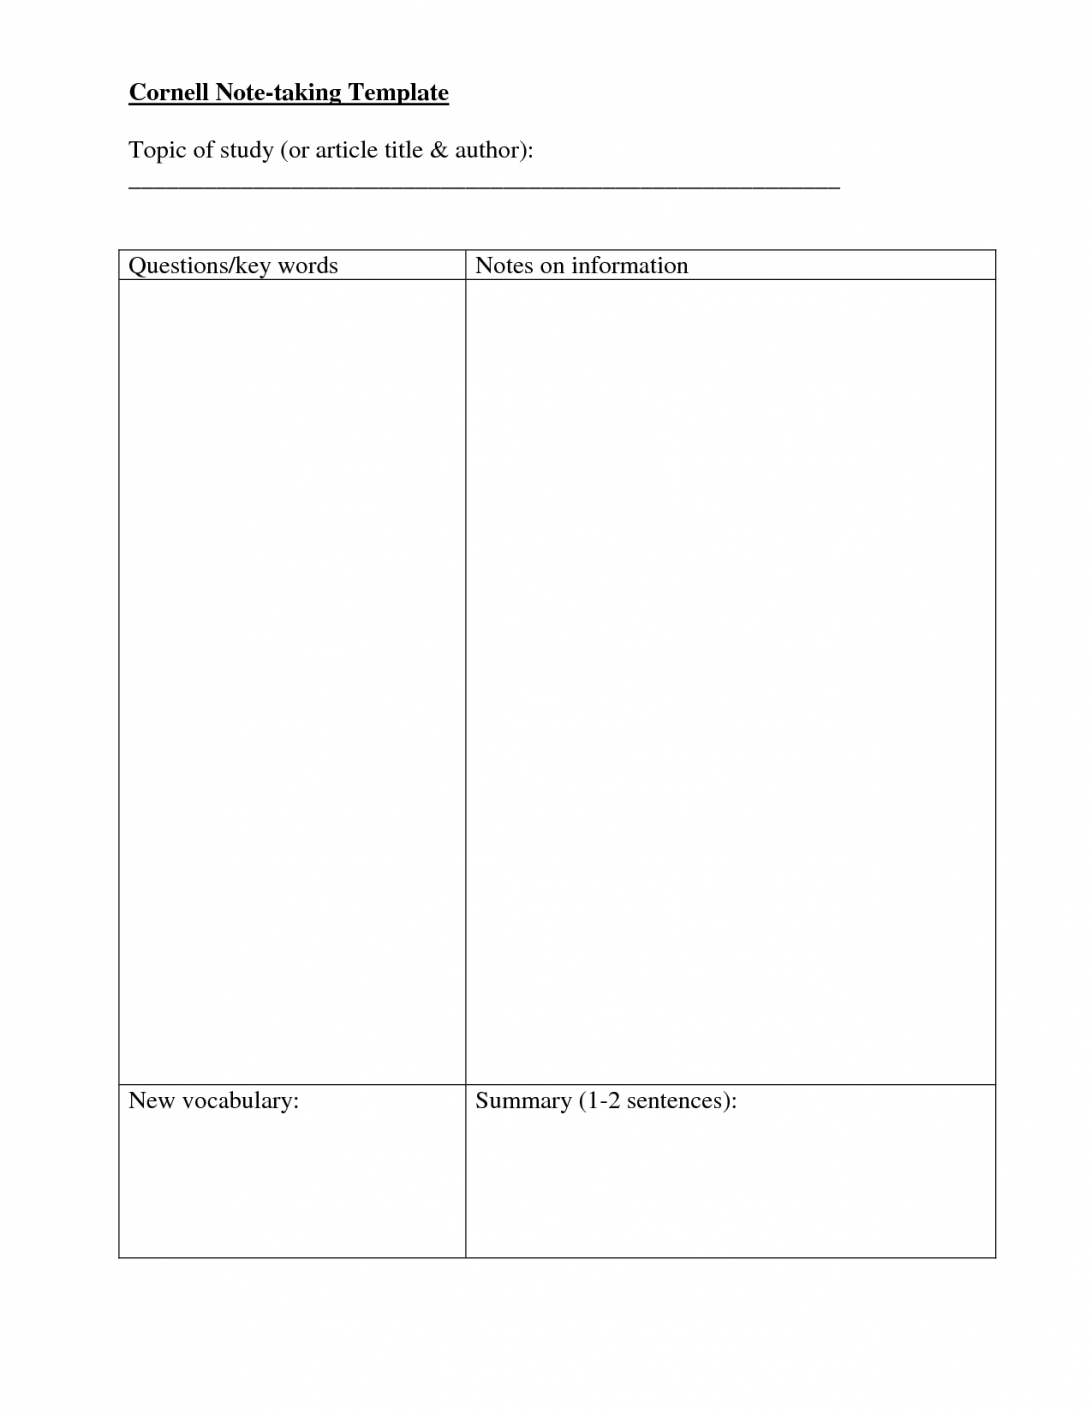 Note Taking Template Free Download Pdf Microsoft Word With Regard To Cornell Note Taking Template Word